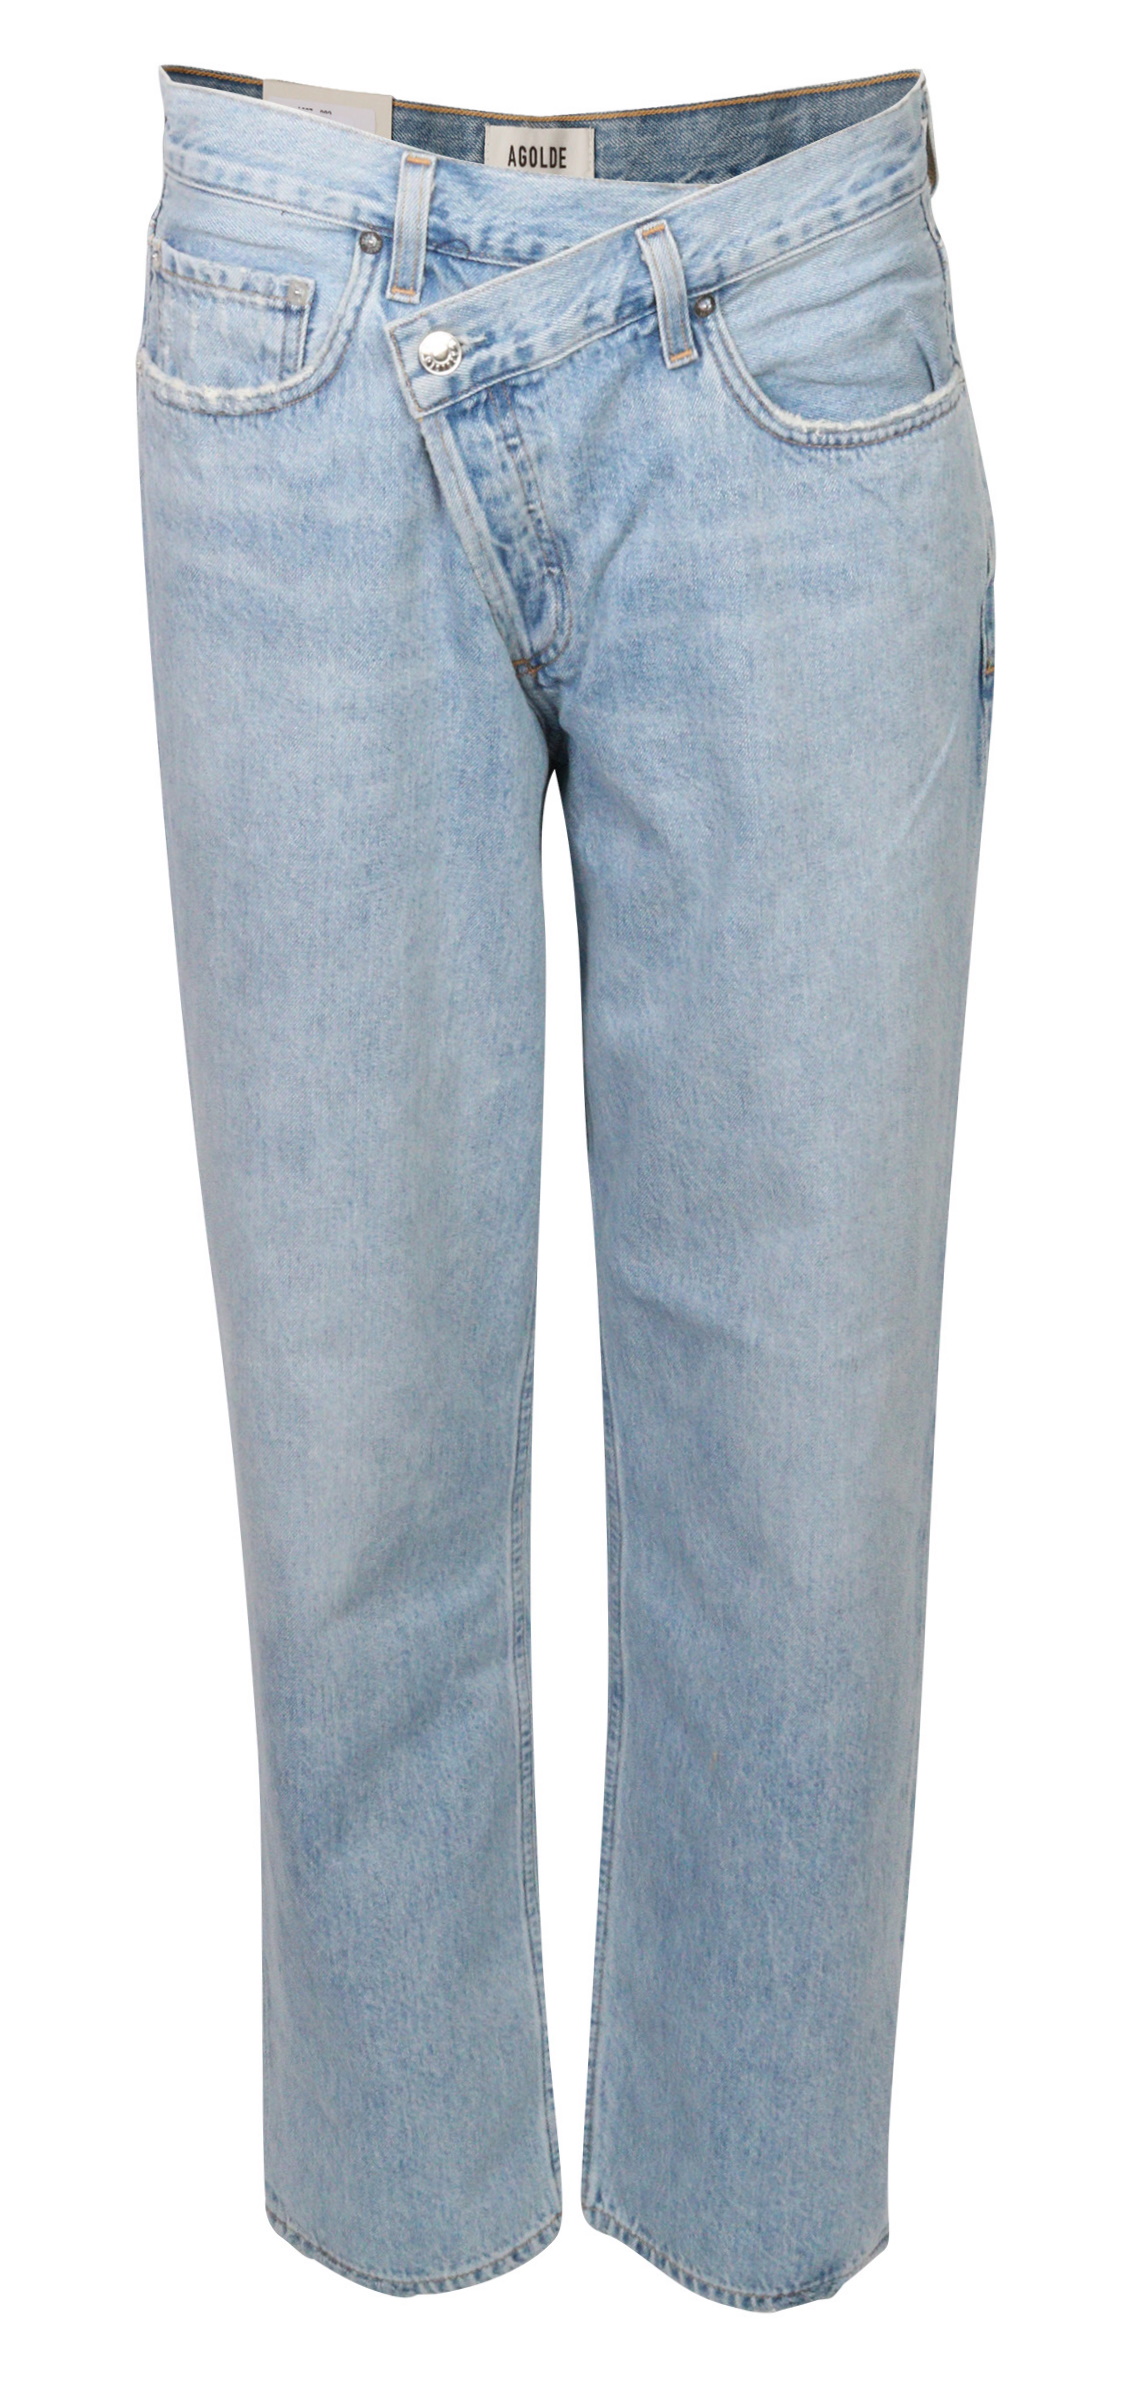 Agolde Jeans Criss Cross Light Blue Washed